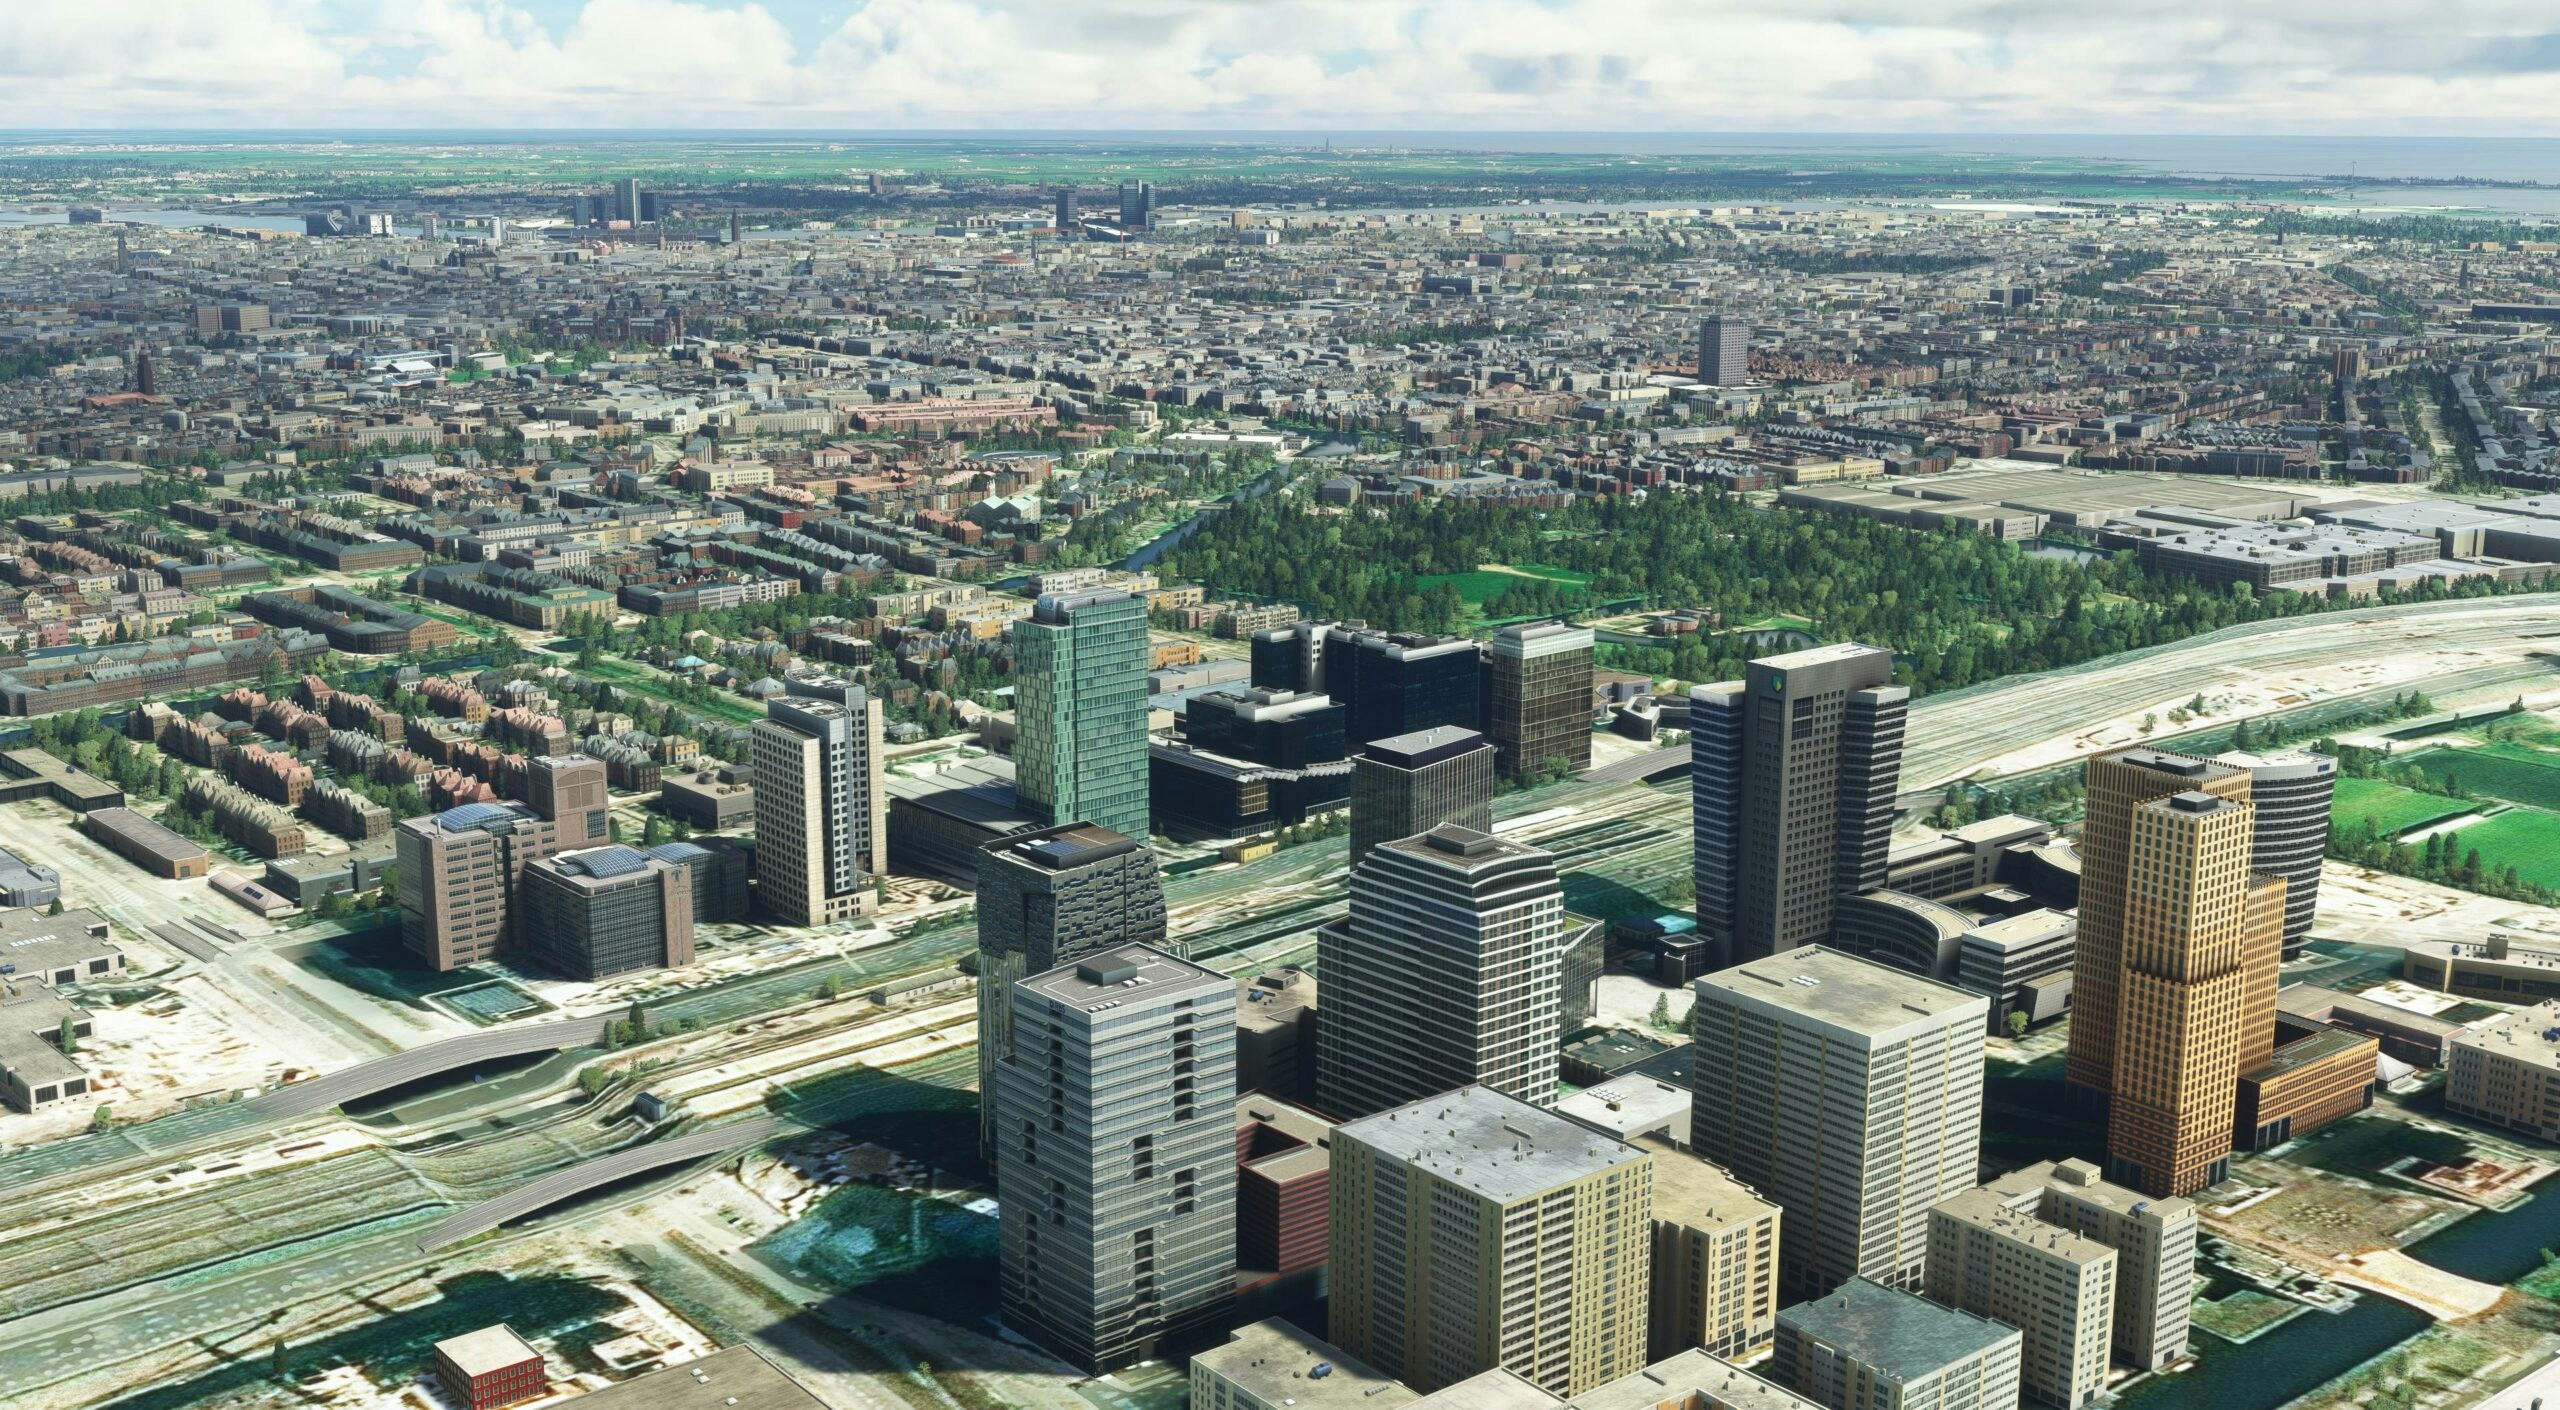 Prealsoft Releases Amsterdam Landmarks for MSFS